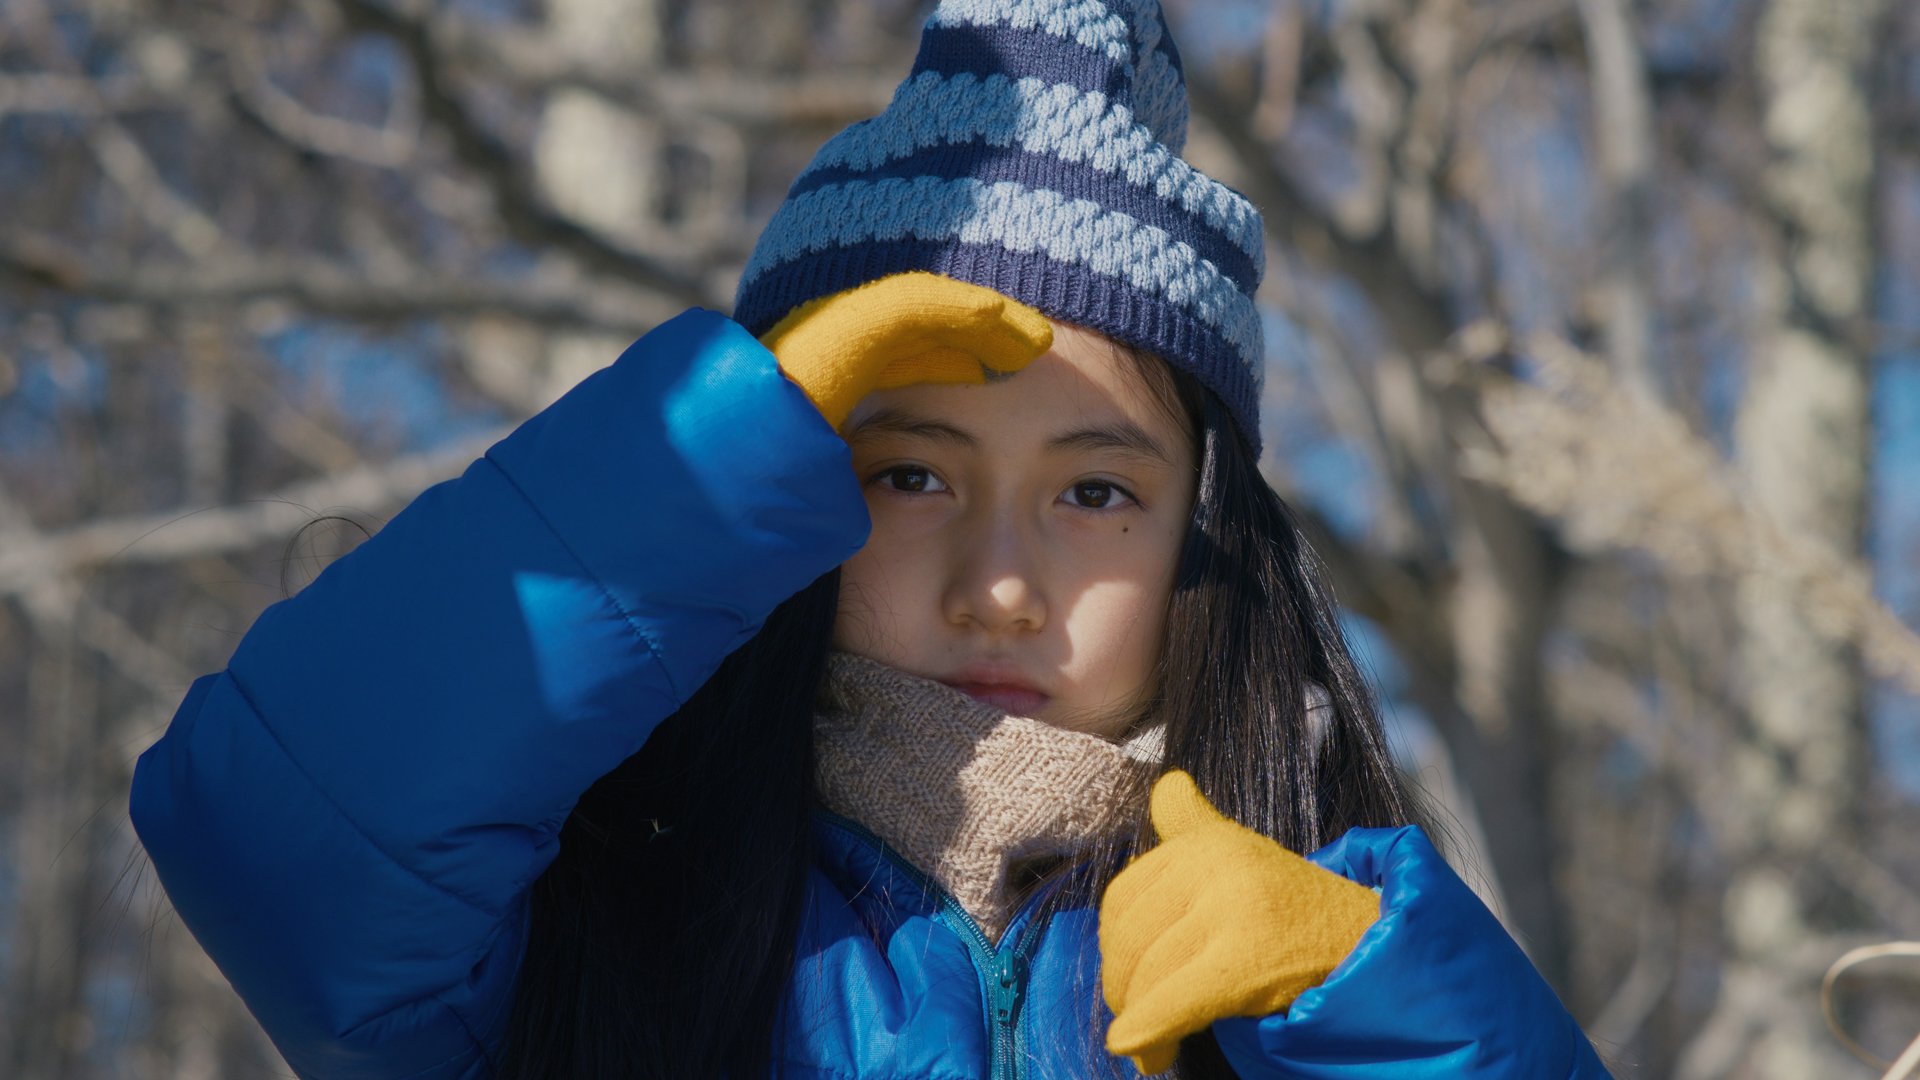 A young girl in bright winter clothing faces the camera, shielding her eyes from the sun.